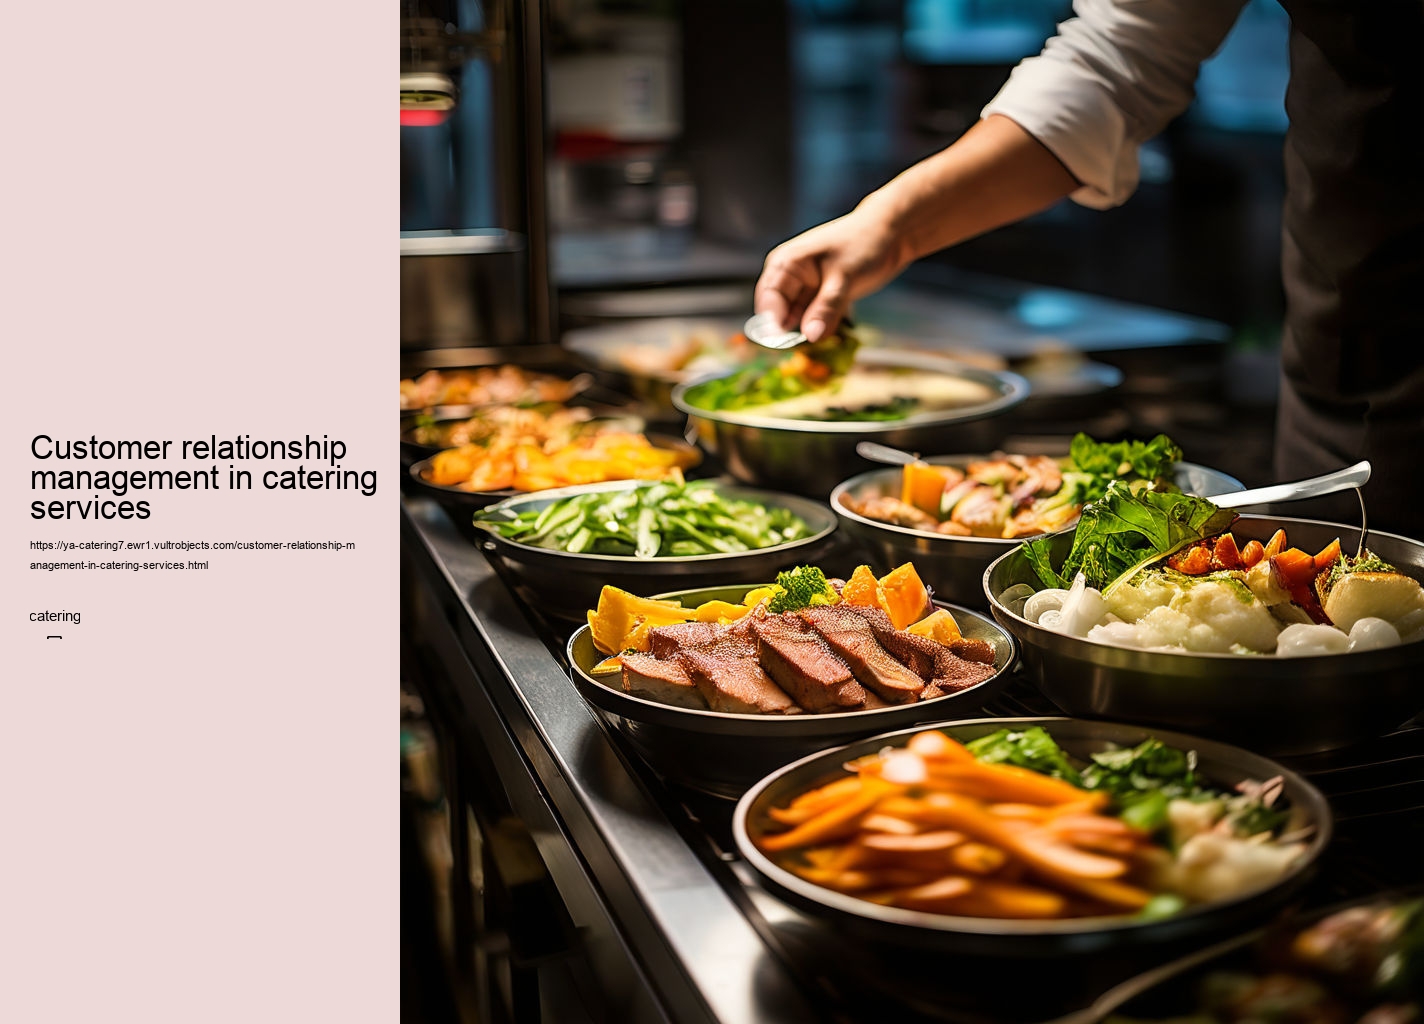 Customer relationship management in catering services